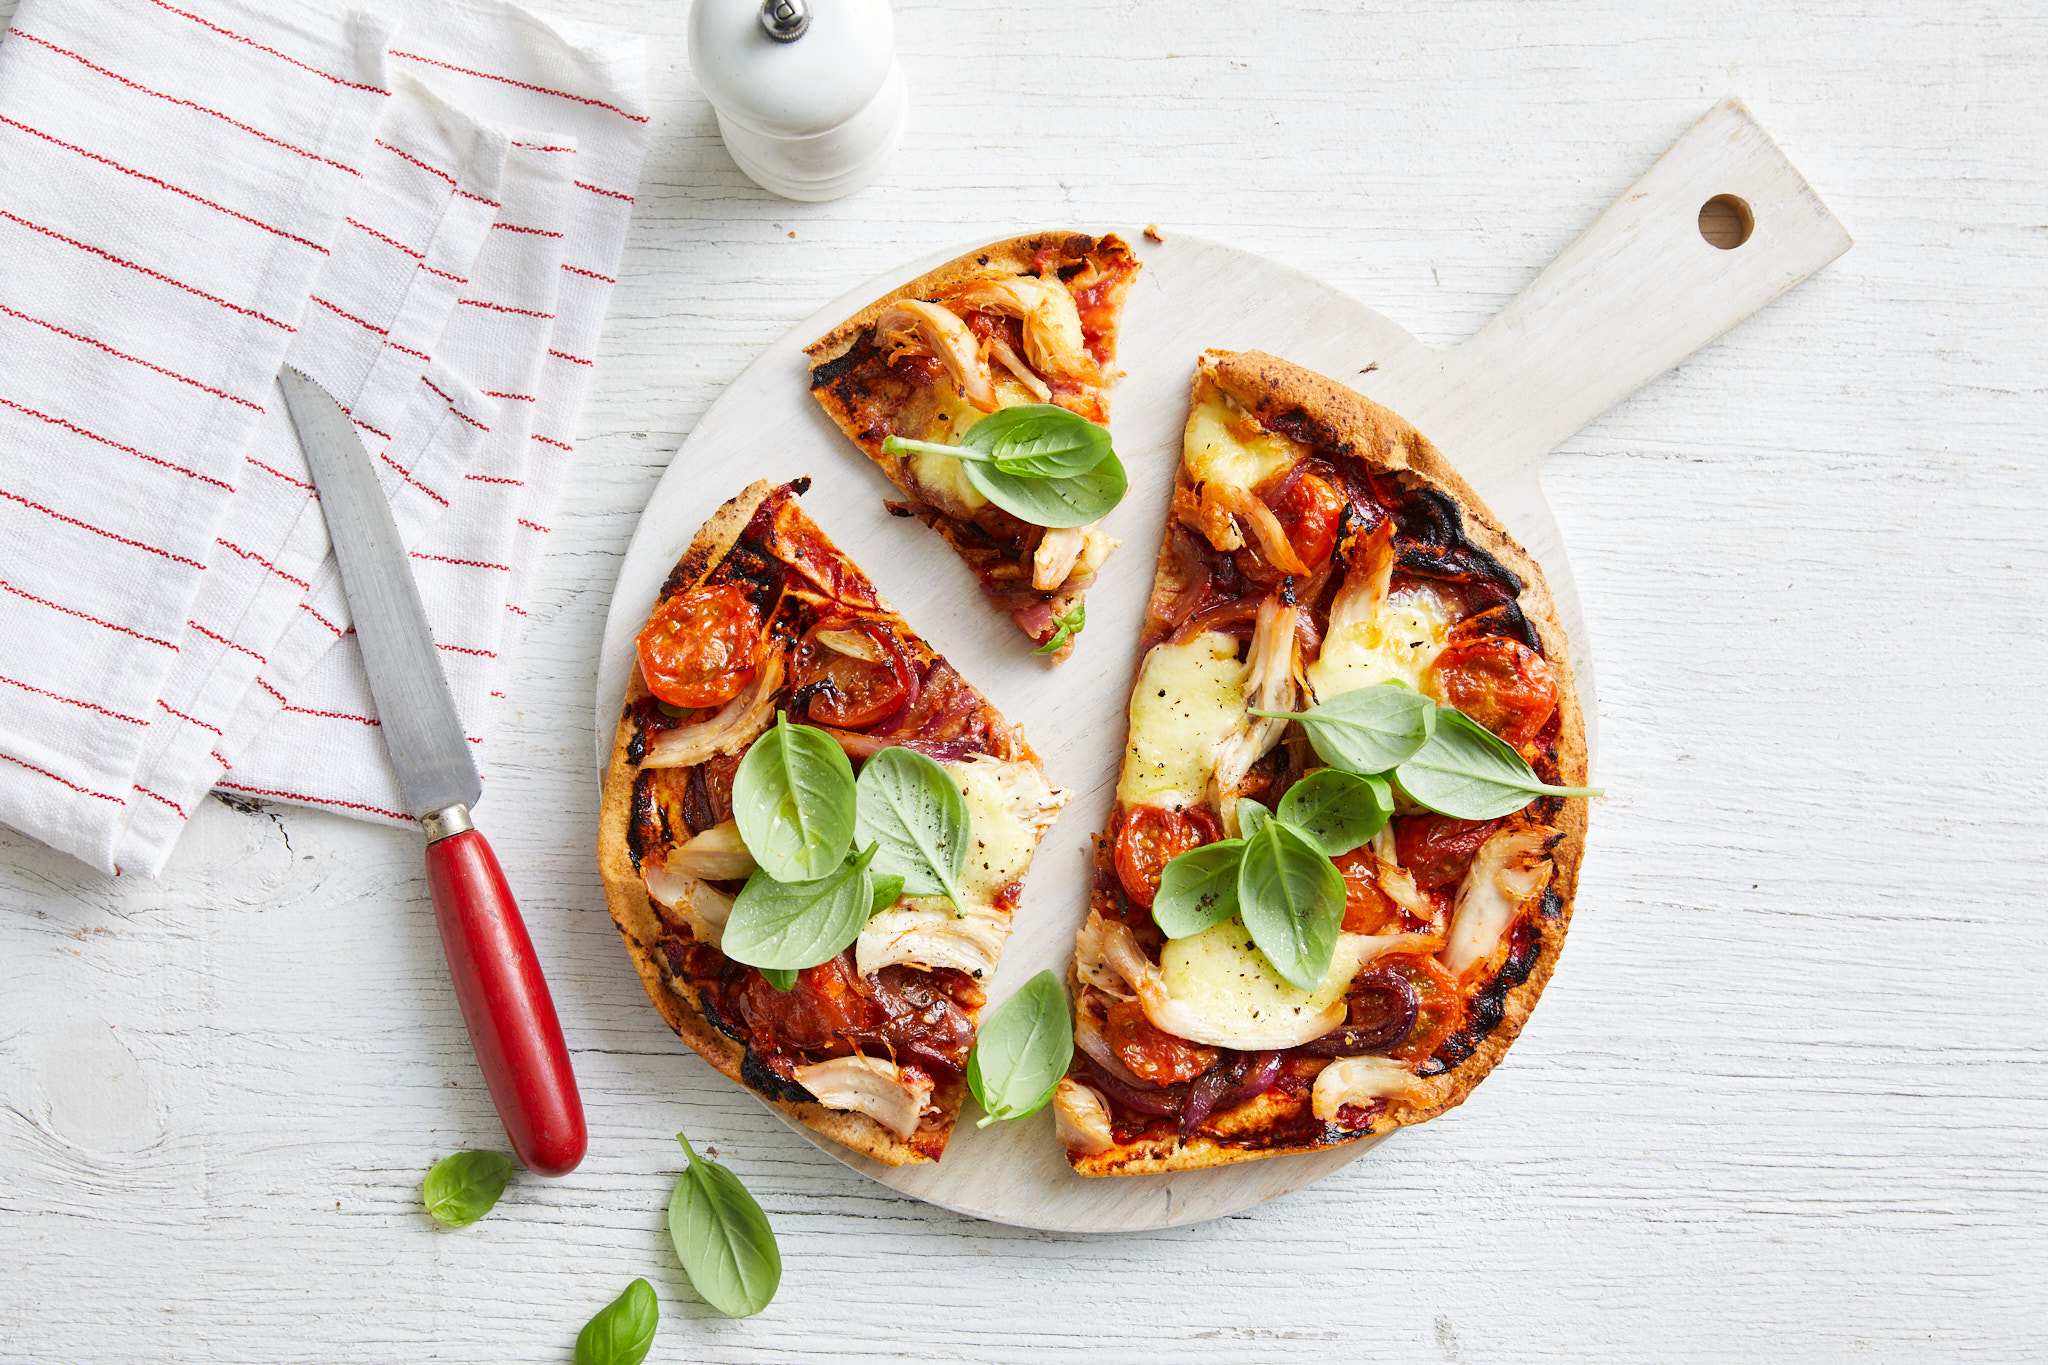 A delicious pizza topped with melted cheese, juicy tomatoes, and fresh basil leaves